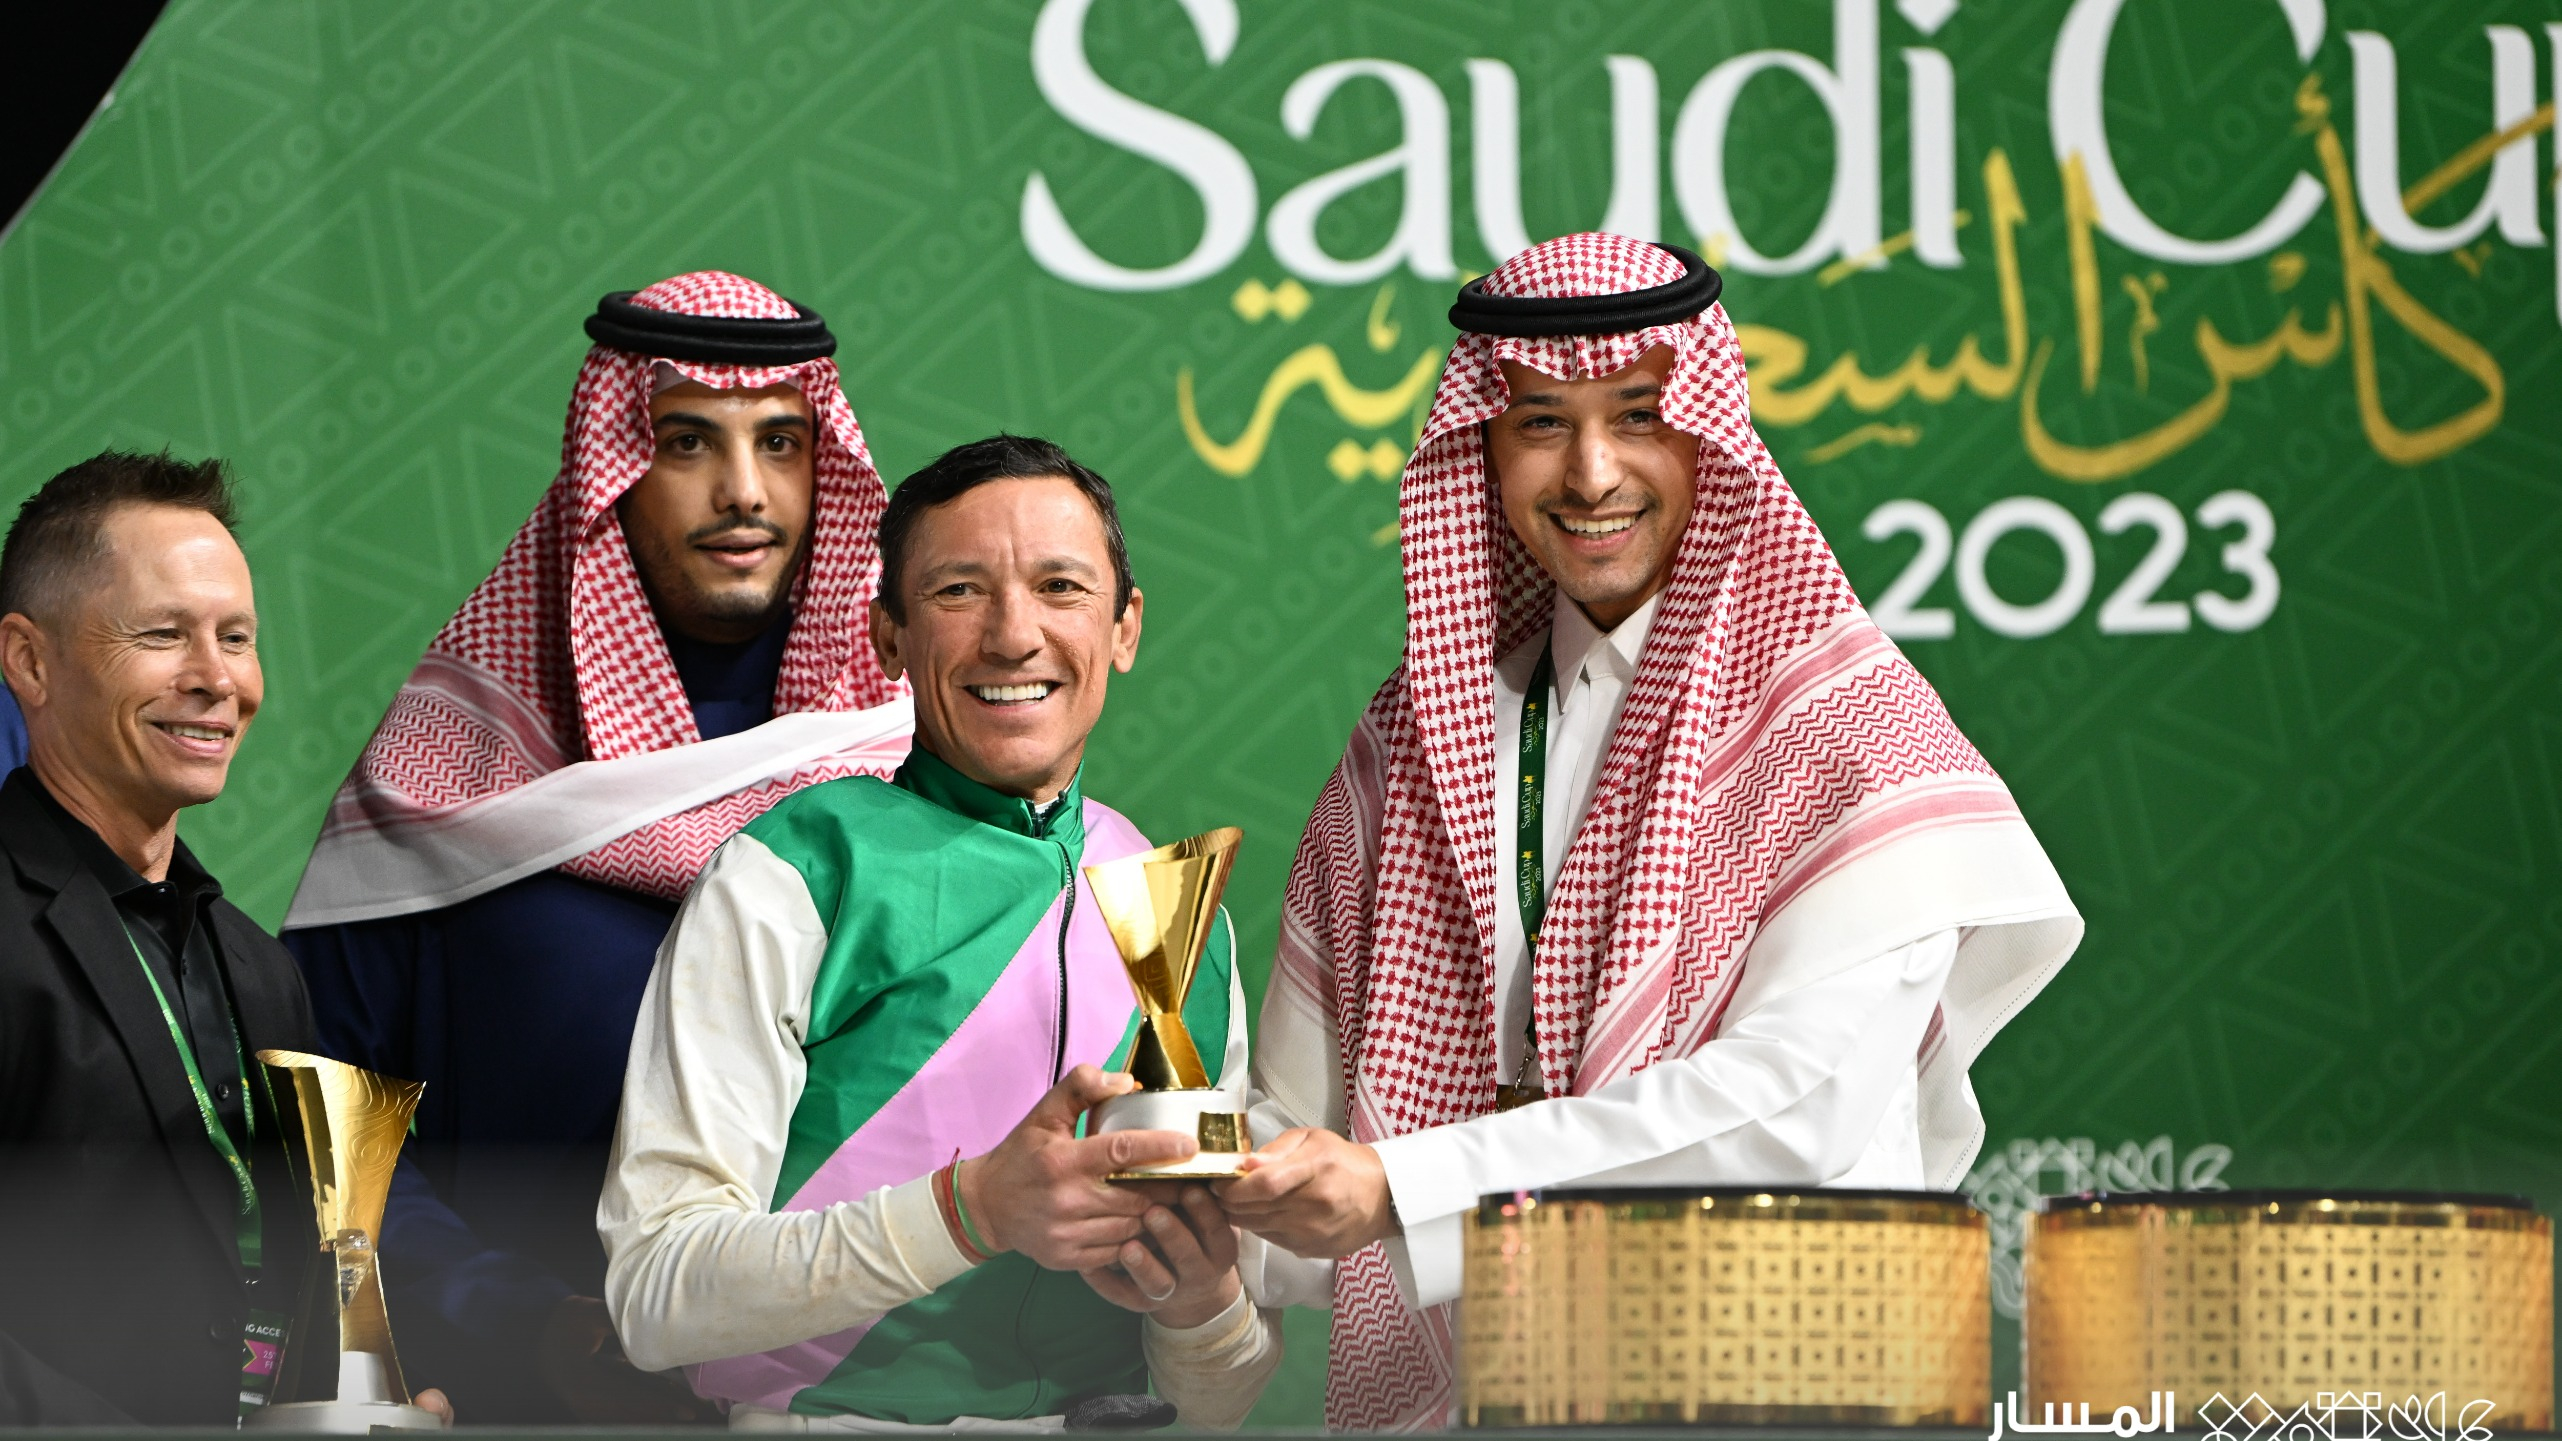 Many congratulations to the winner of G3 Riyadh Dirt Sprint presented by #Sports_Boulevard 🏅
 
#SaudiCup 2023